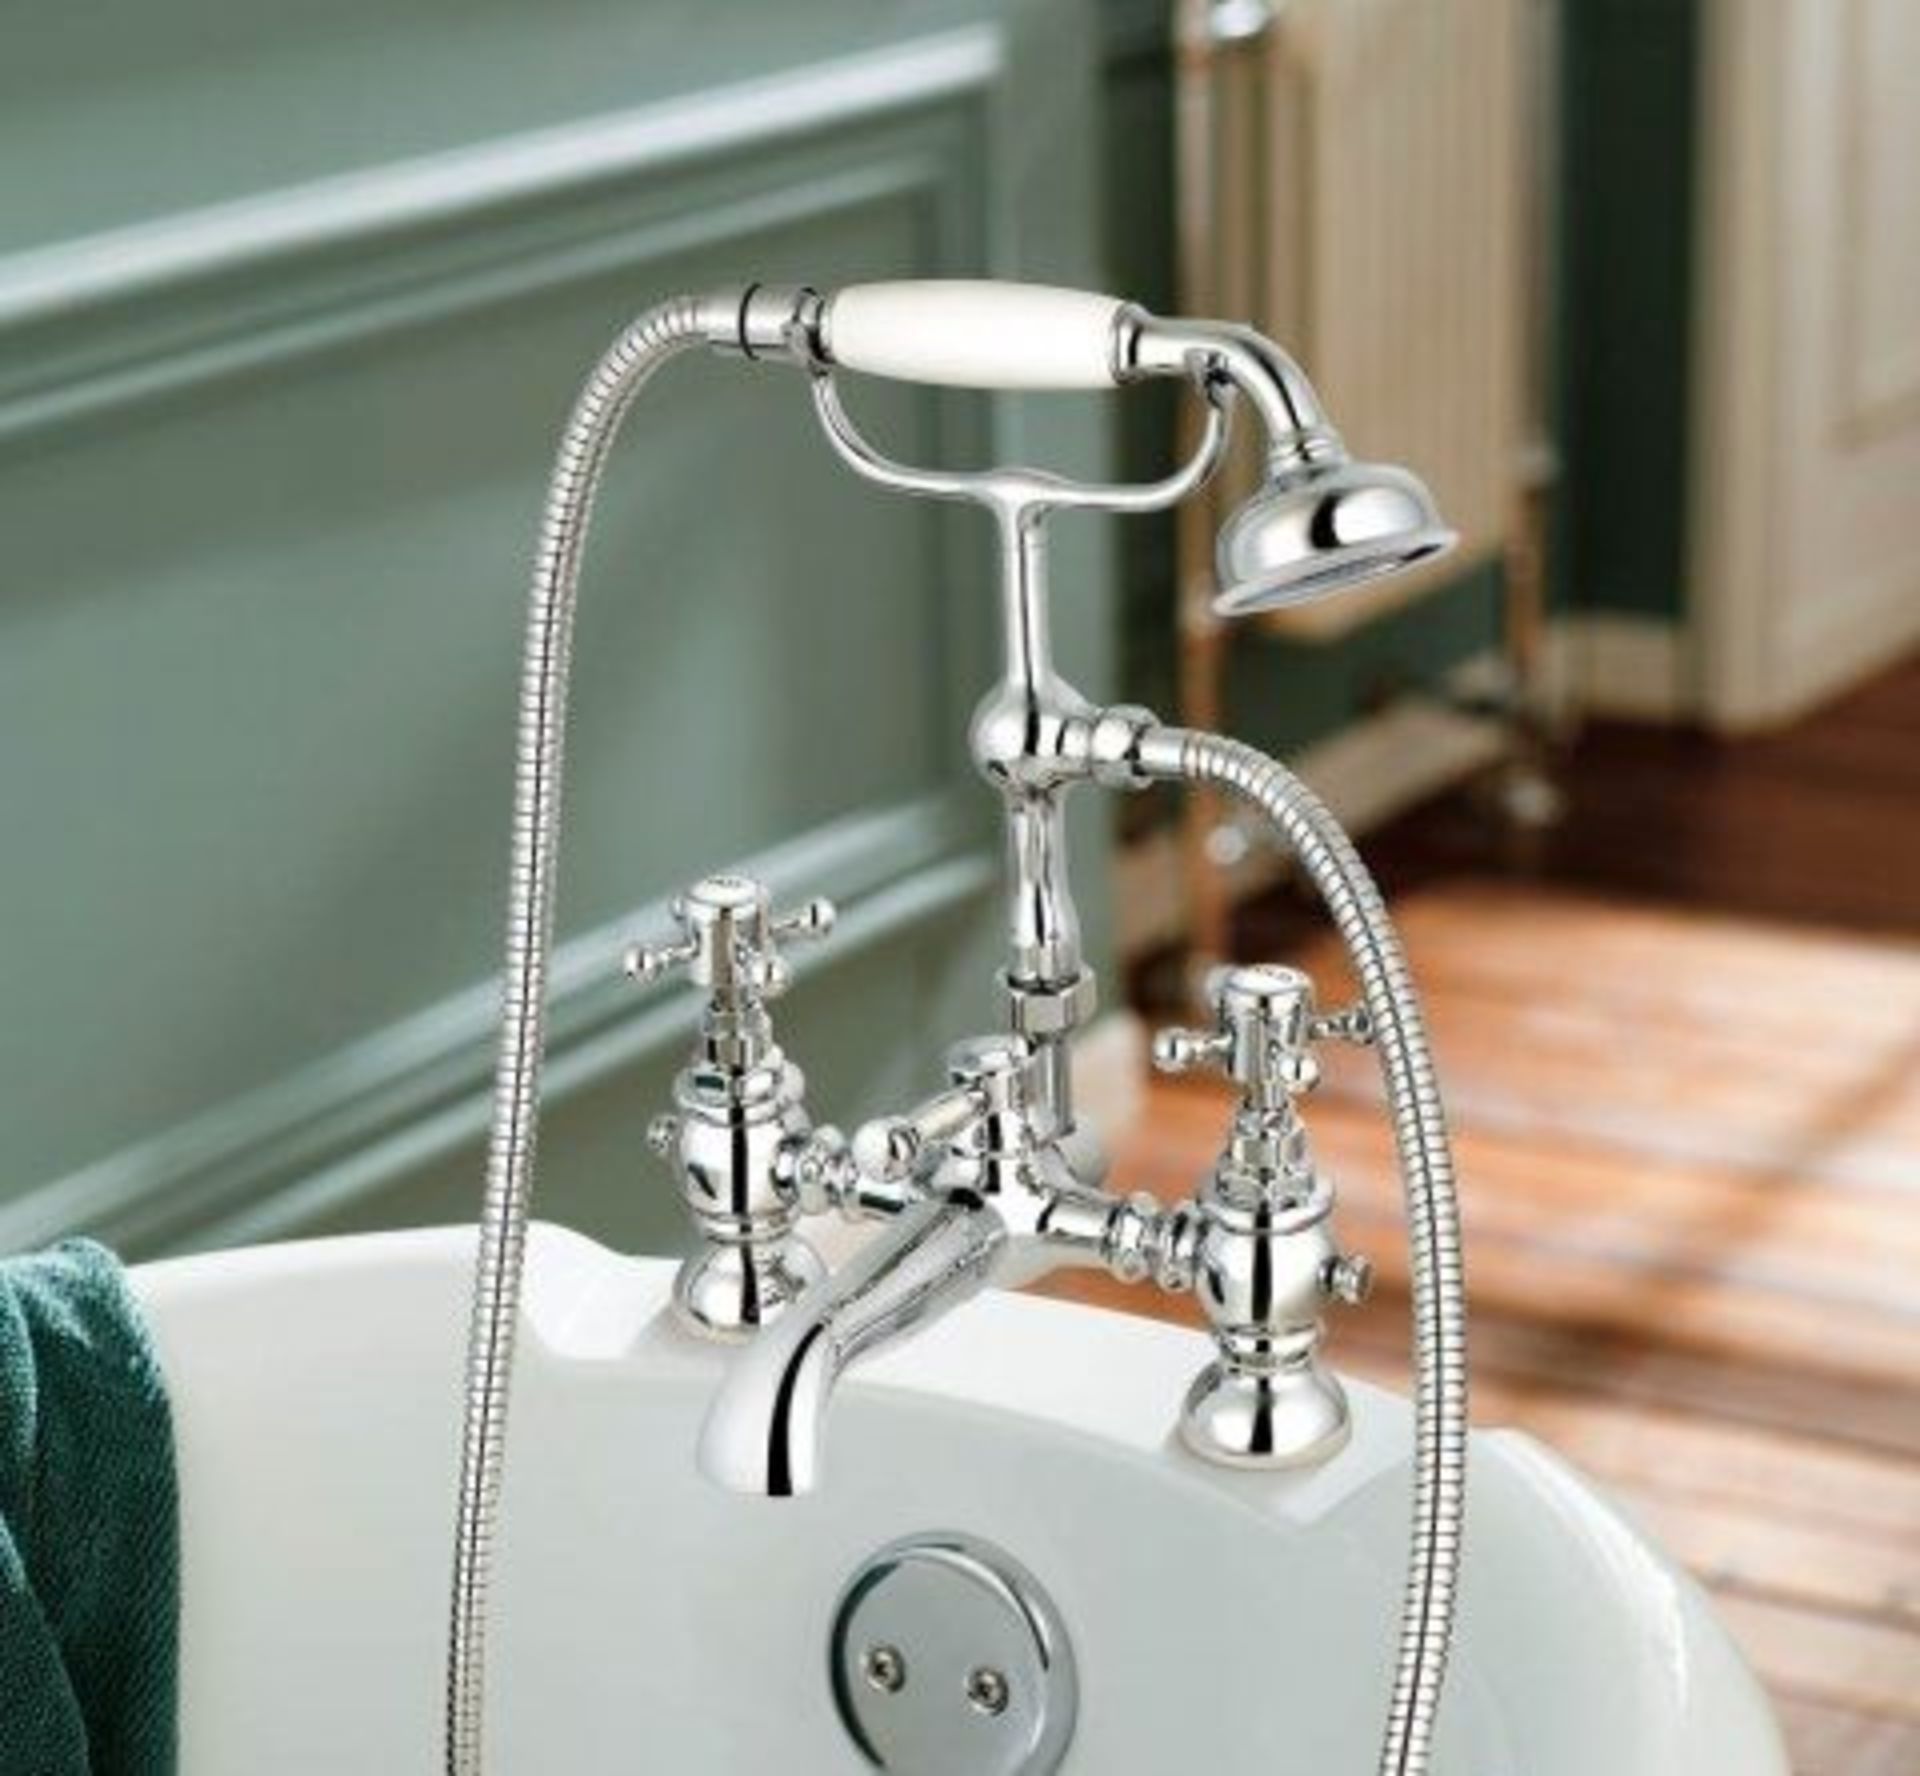 New & Boxed Victoria II Bath Shower Mixer - Traditional Tap With Hand Held. Tb35.Chrome Plated Solid